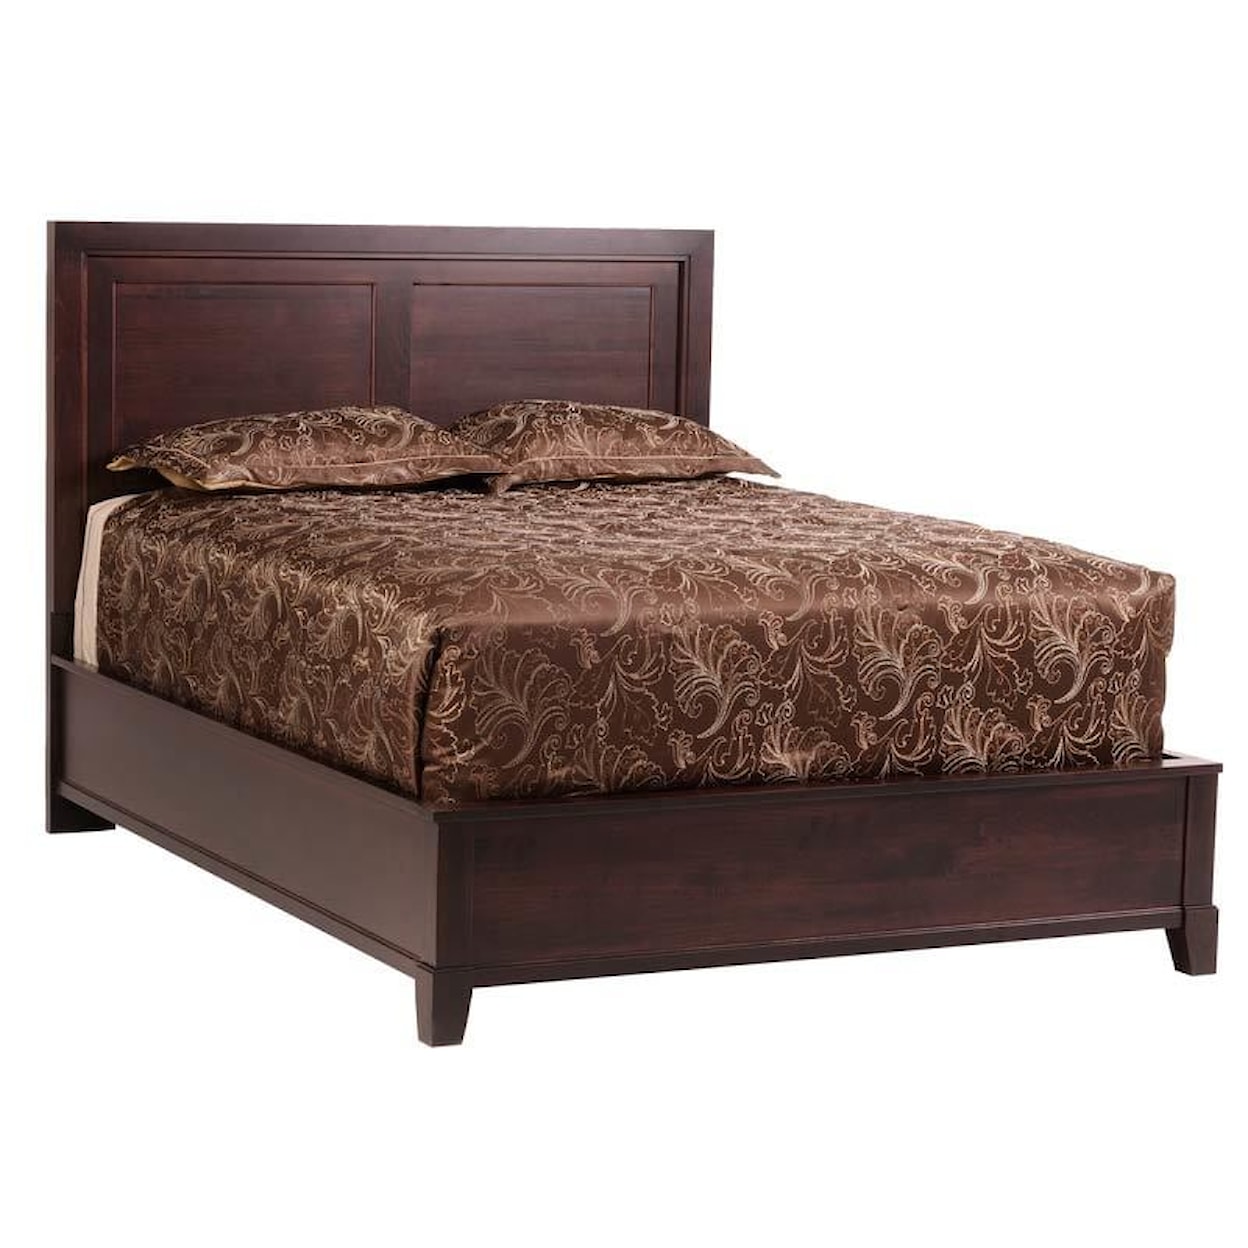 Millcraft Greenwich King Panel Bed